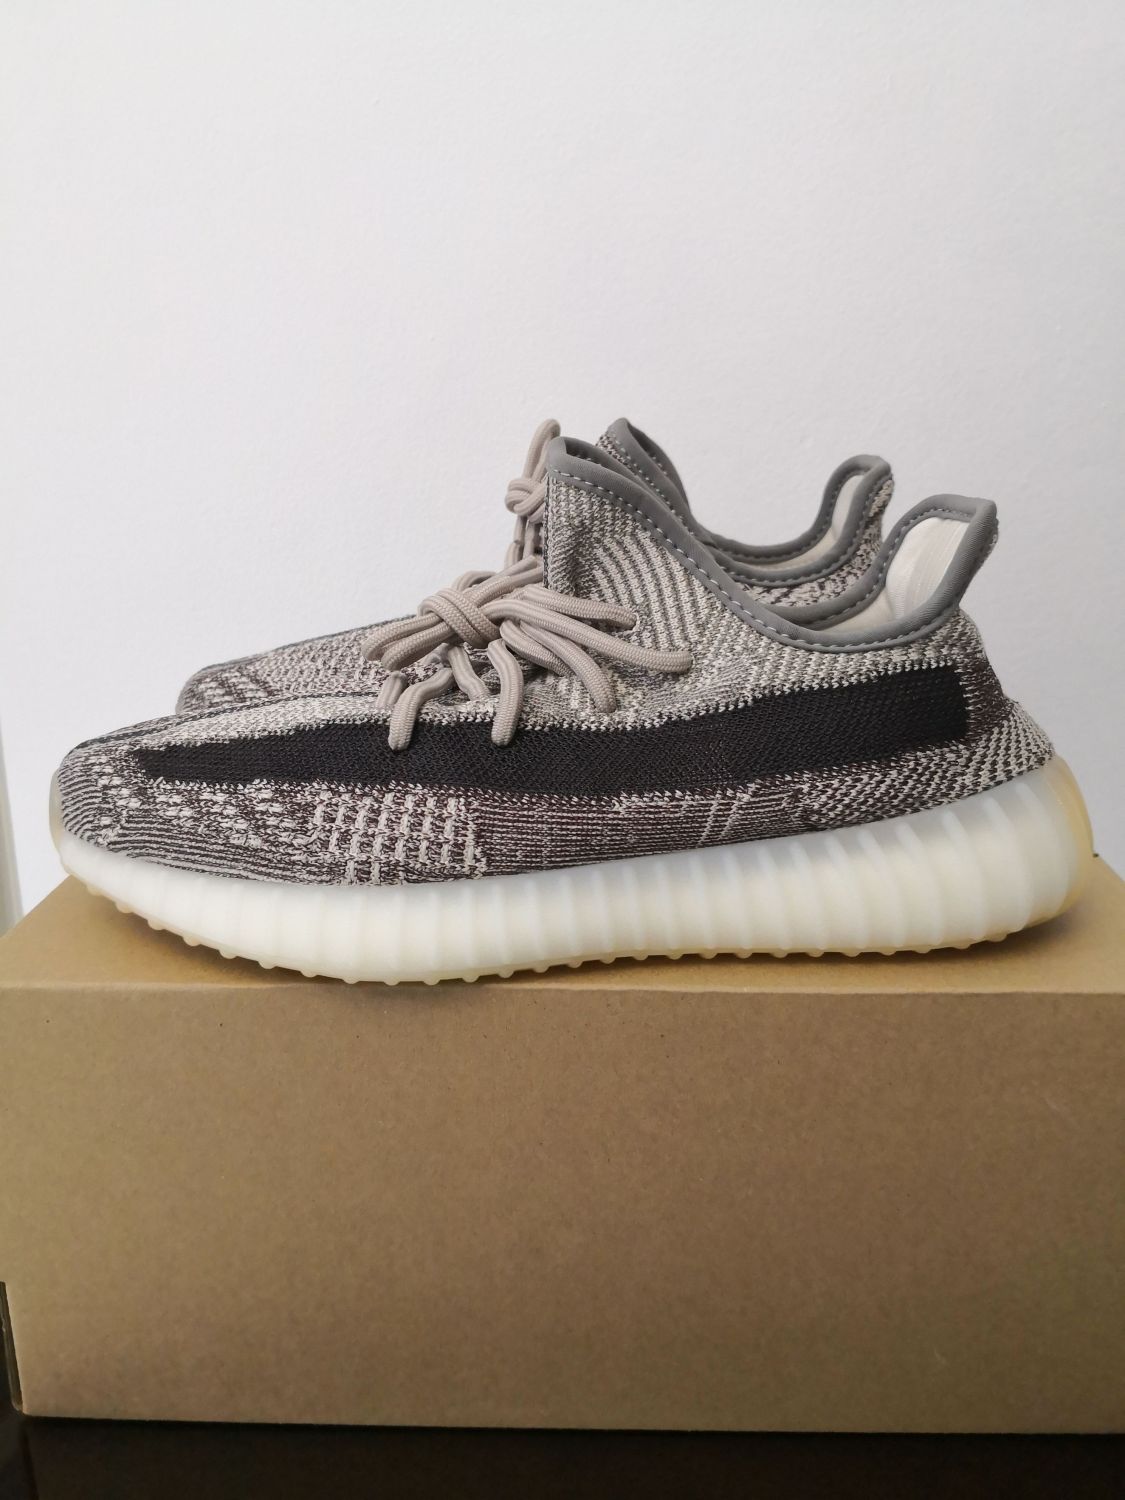 Adidas Yeezy Boost 350 V2 Zyon | AfterMarket